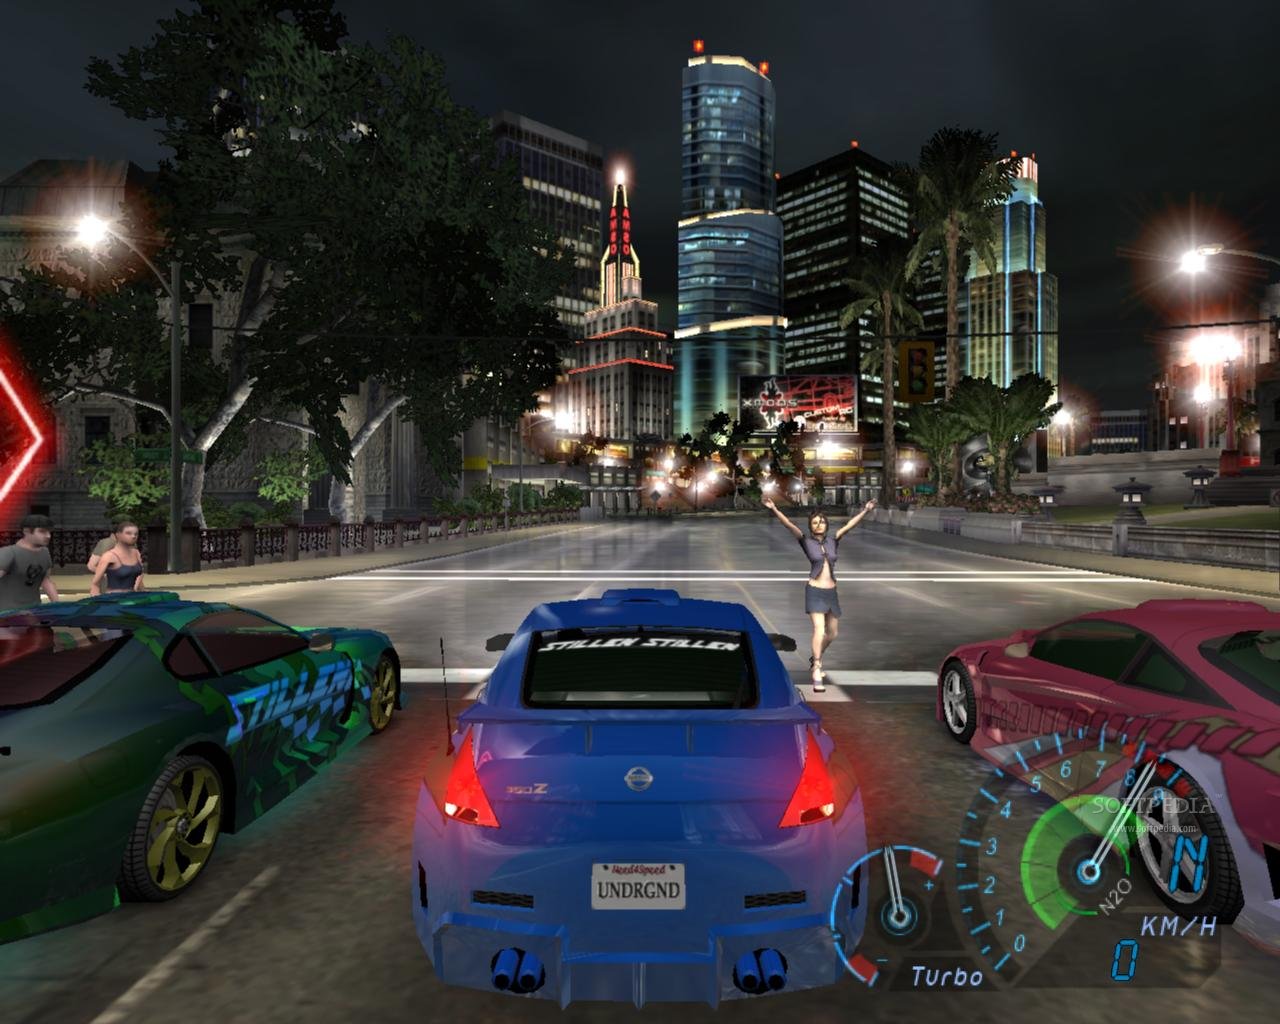  Need For Speed Underground : Video Games